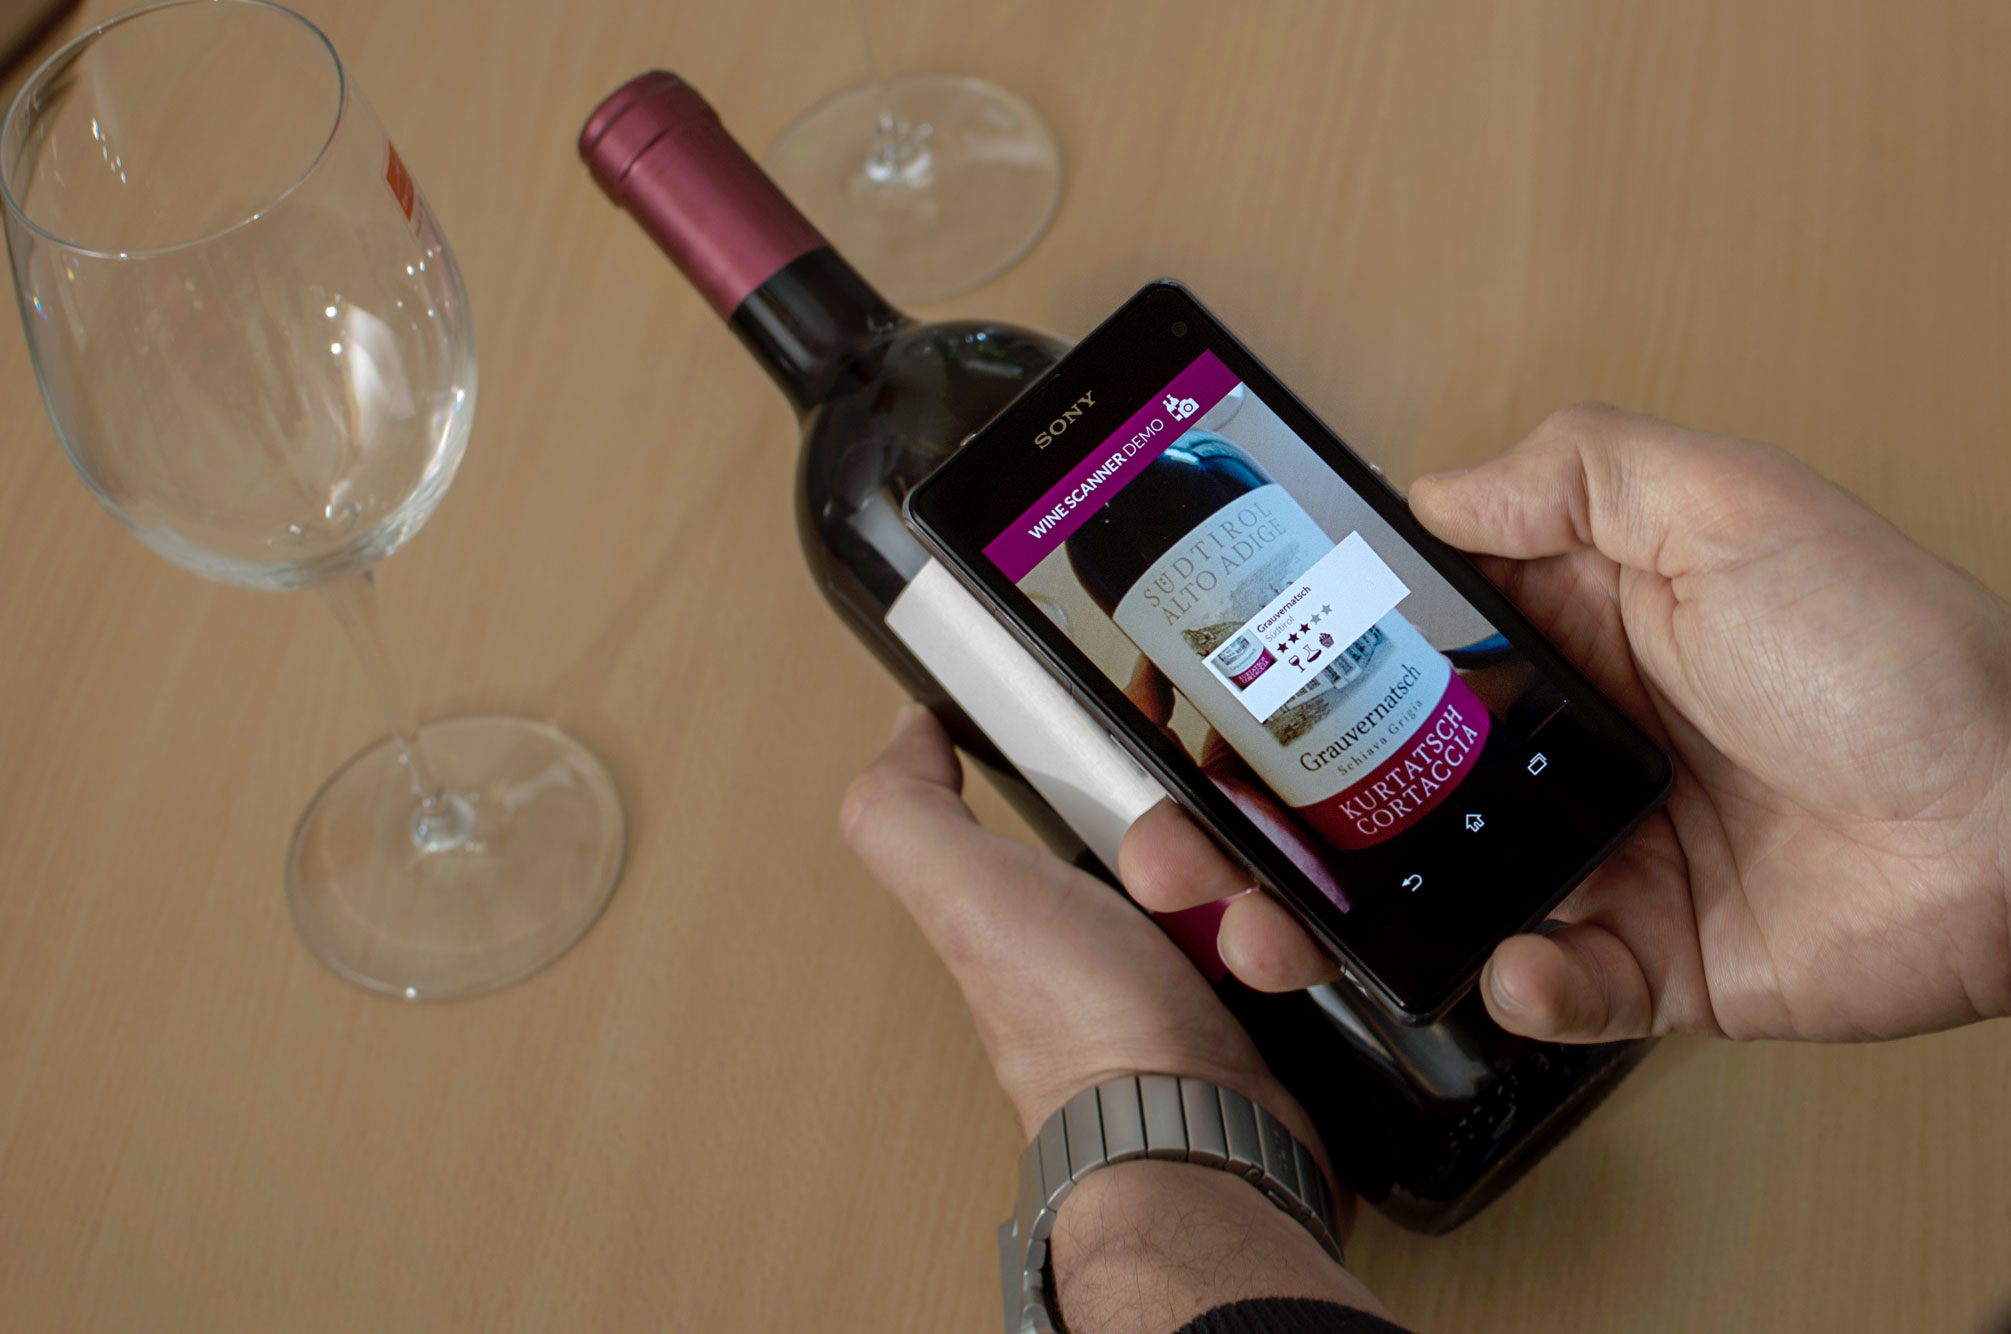 Wine bottle label augmented using Wikitude Image Tracking Cloud Recognition